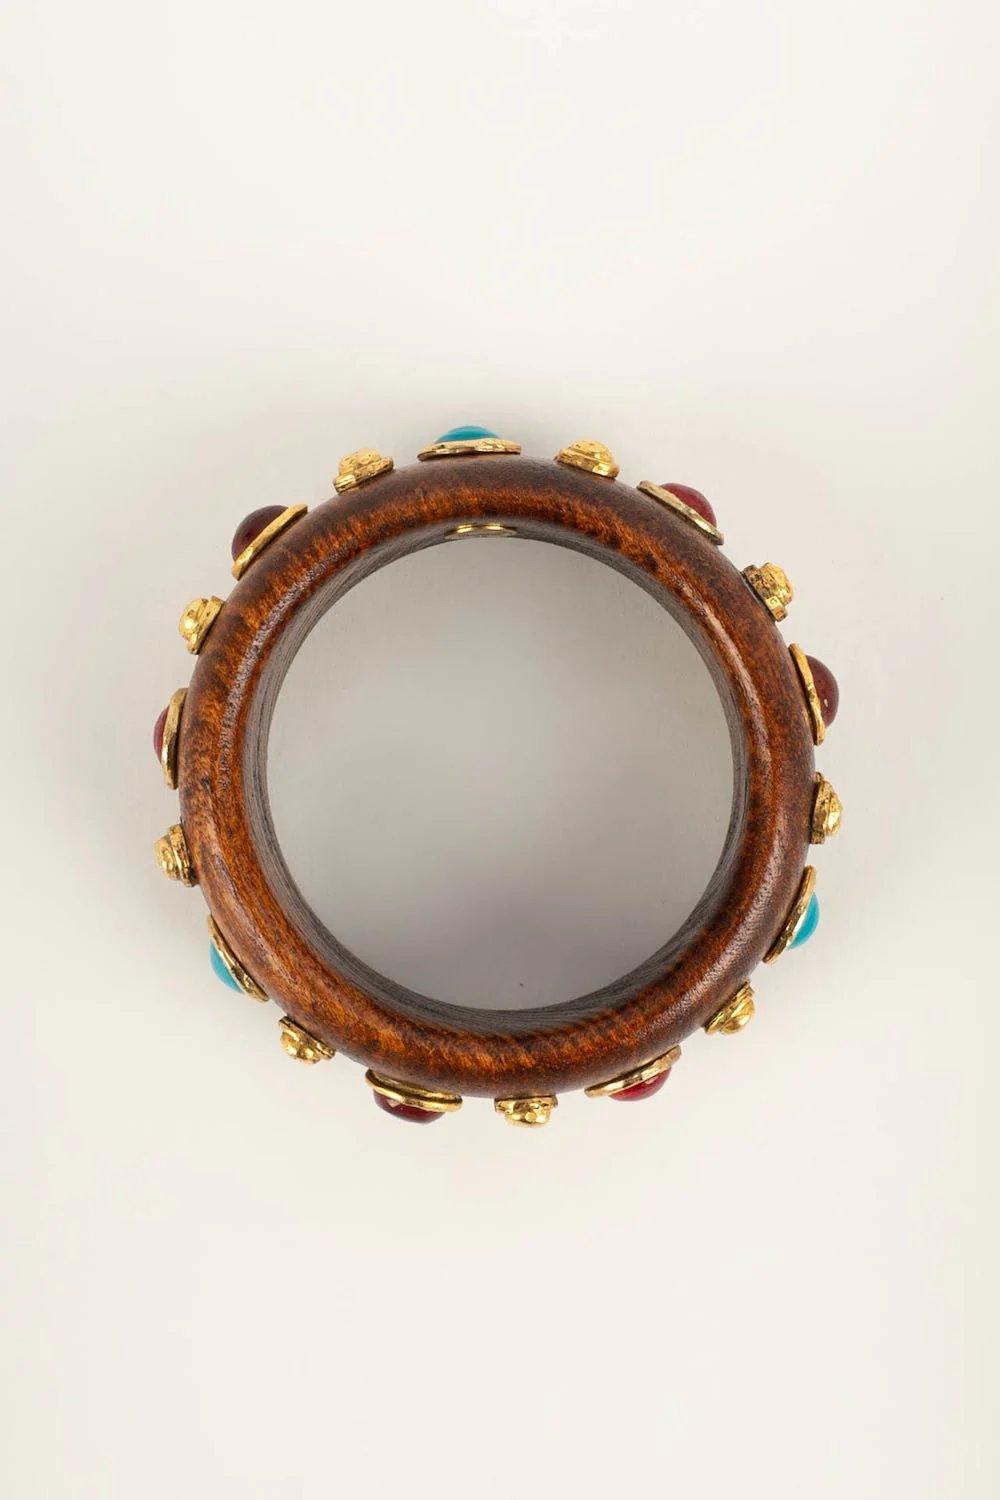 Chanel Wooden and Golden Metal Bracelet Paved with Multicolored Cabochons 2